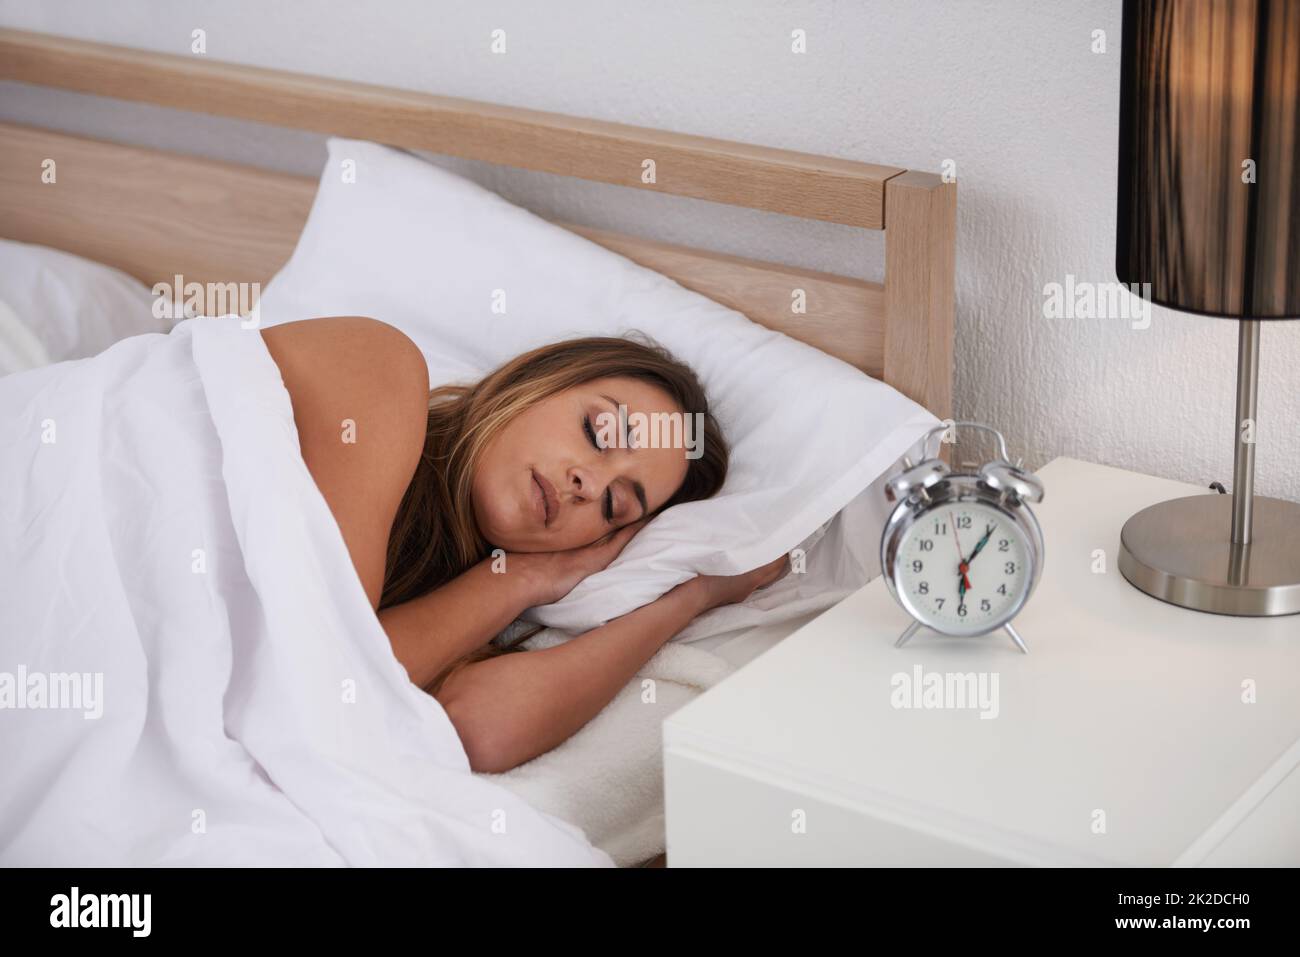 The alarm will go off soon.... Shot of a beautiful young woman sleeping in her bed. Stock Photo